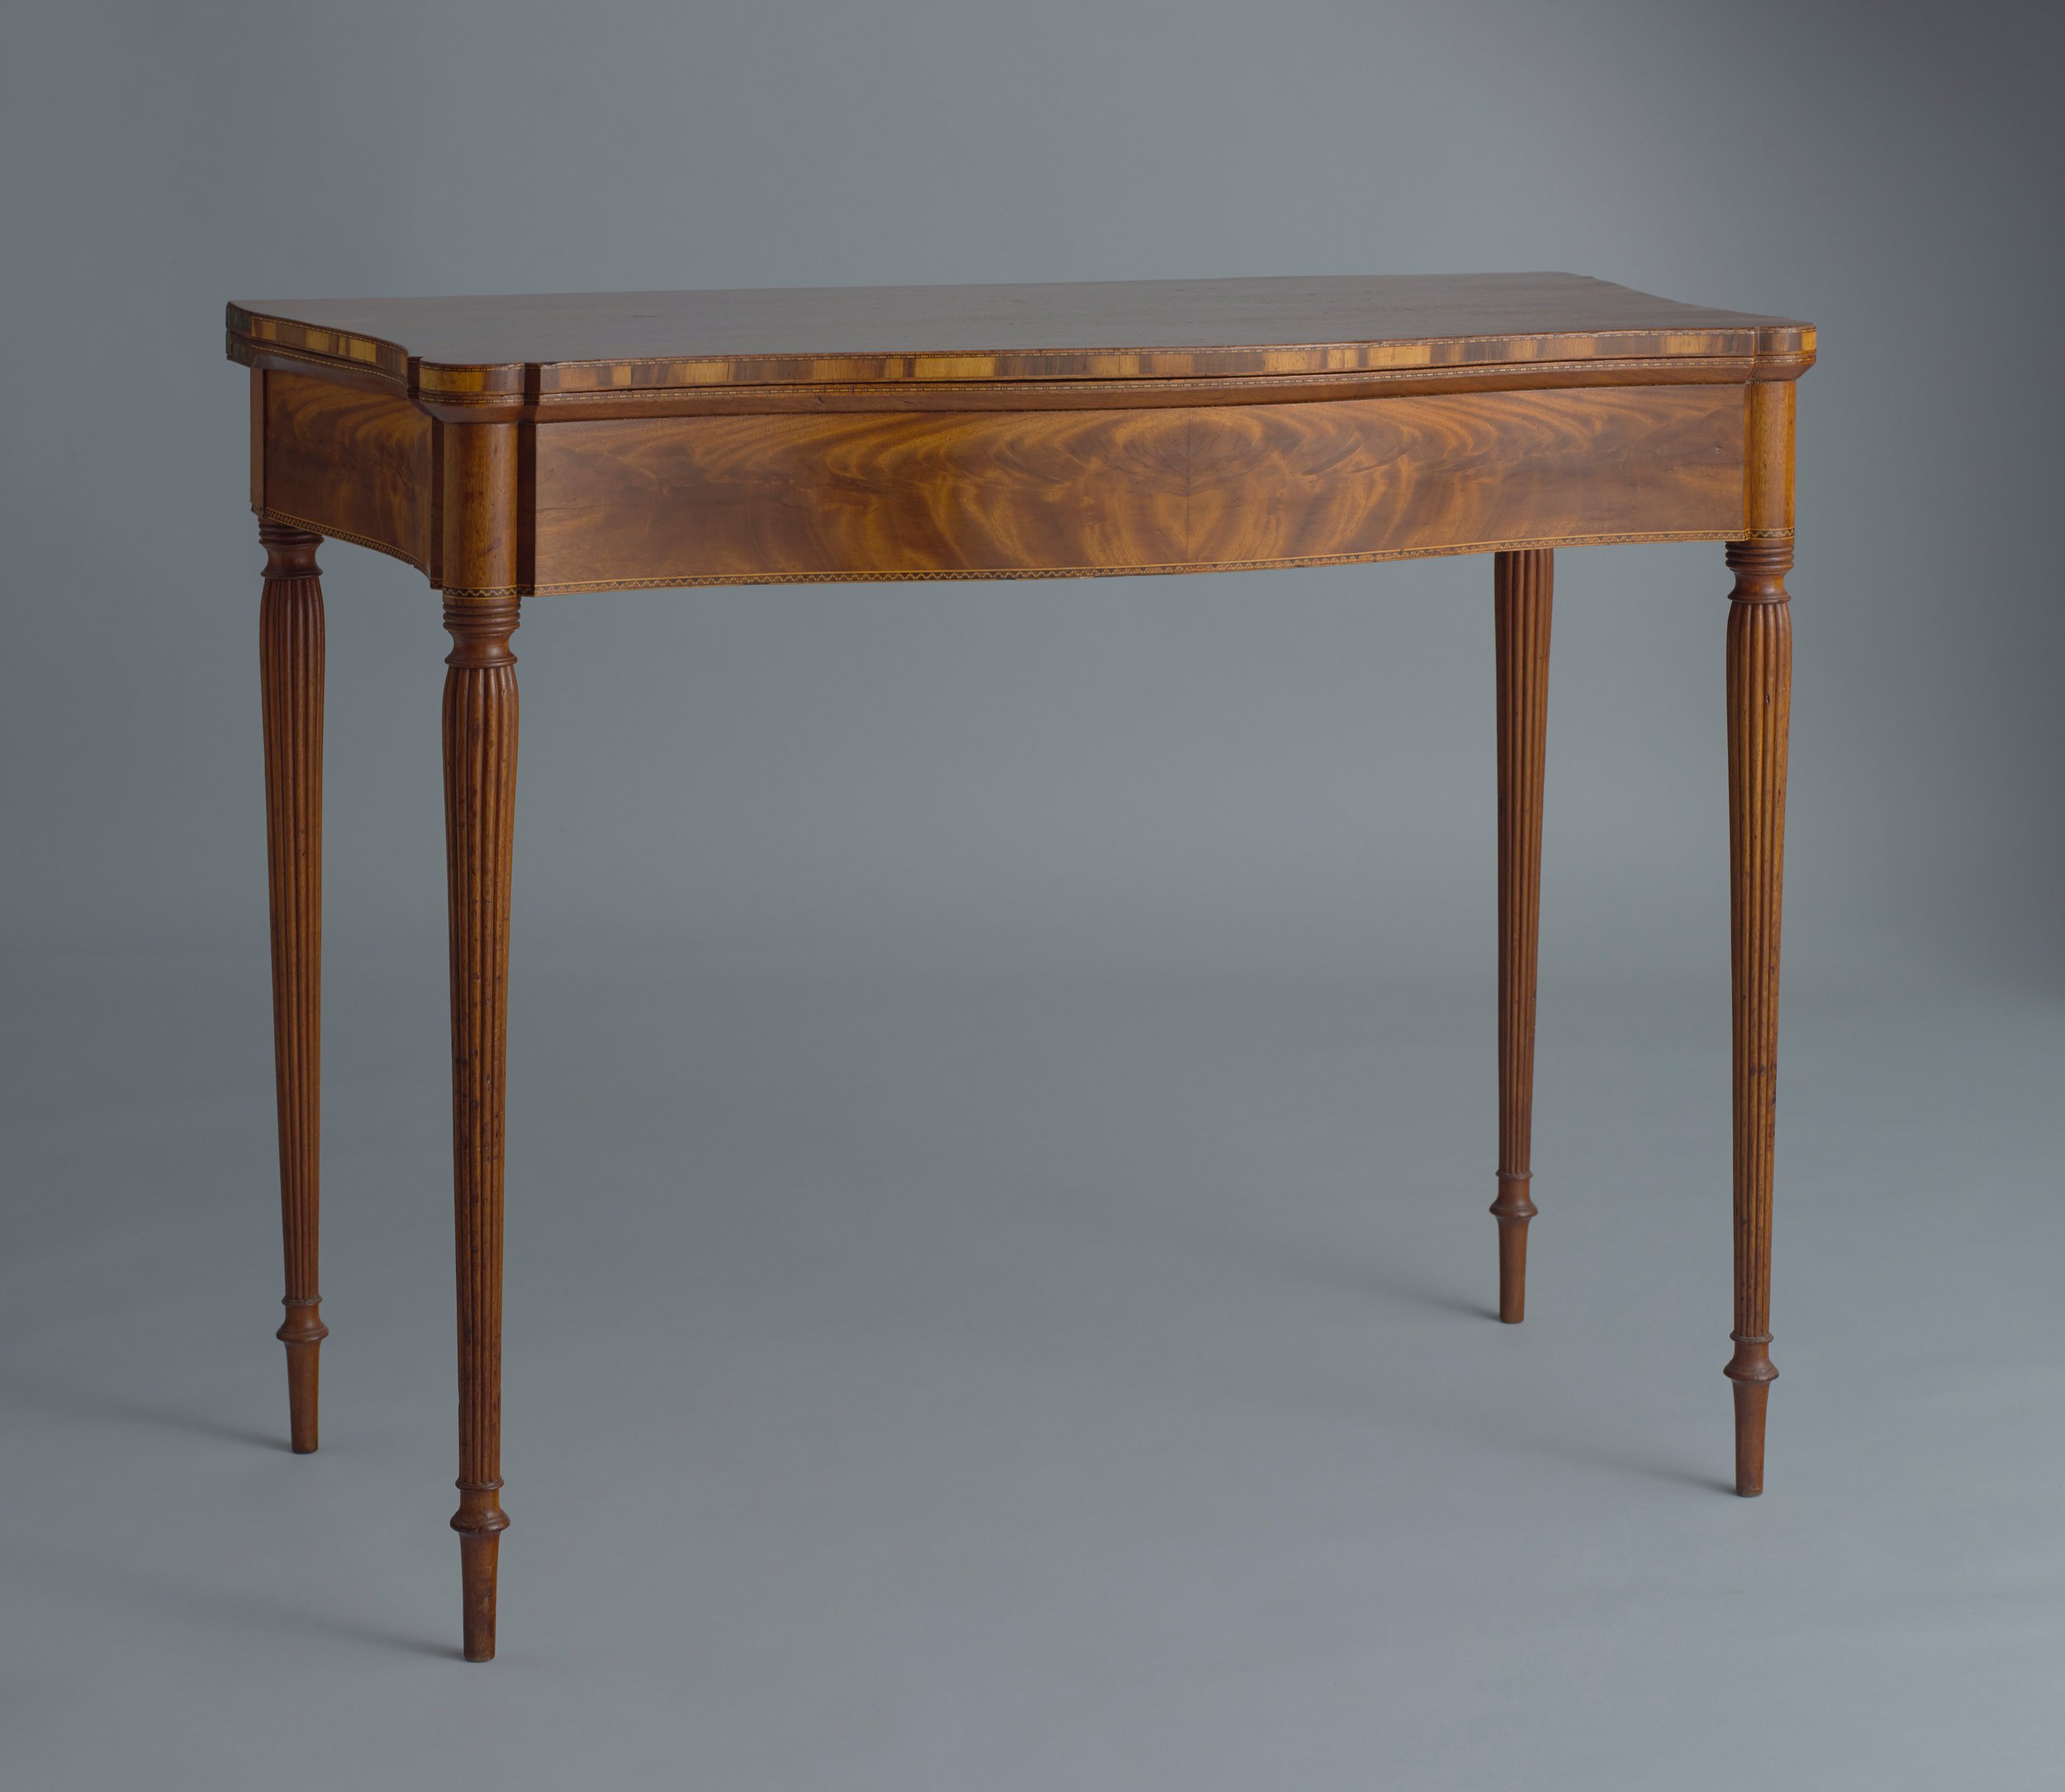   Daniel Radford  United States, 1786–after 1834  Card Table , circa 1805 mahogany, brass, 29 15/16 x 38 1/8 x 18 9/16 inches Museum purchase with support from Mr. and Mrs. Fletcher Brown, Frances W. Peabody, Mrs. John R. Rand, Earle G. Shettleworth,